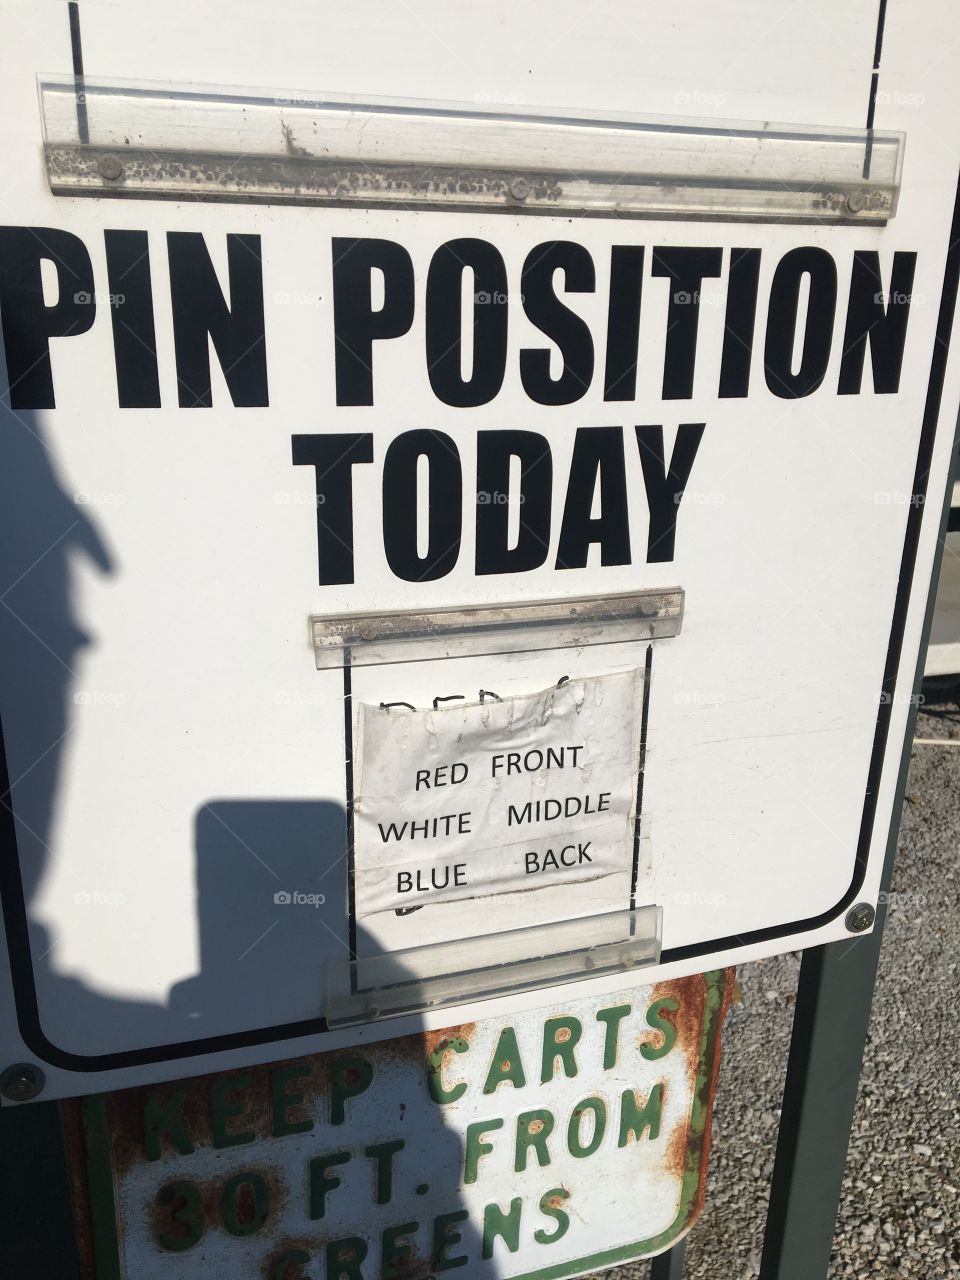 Pin position